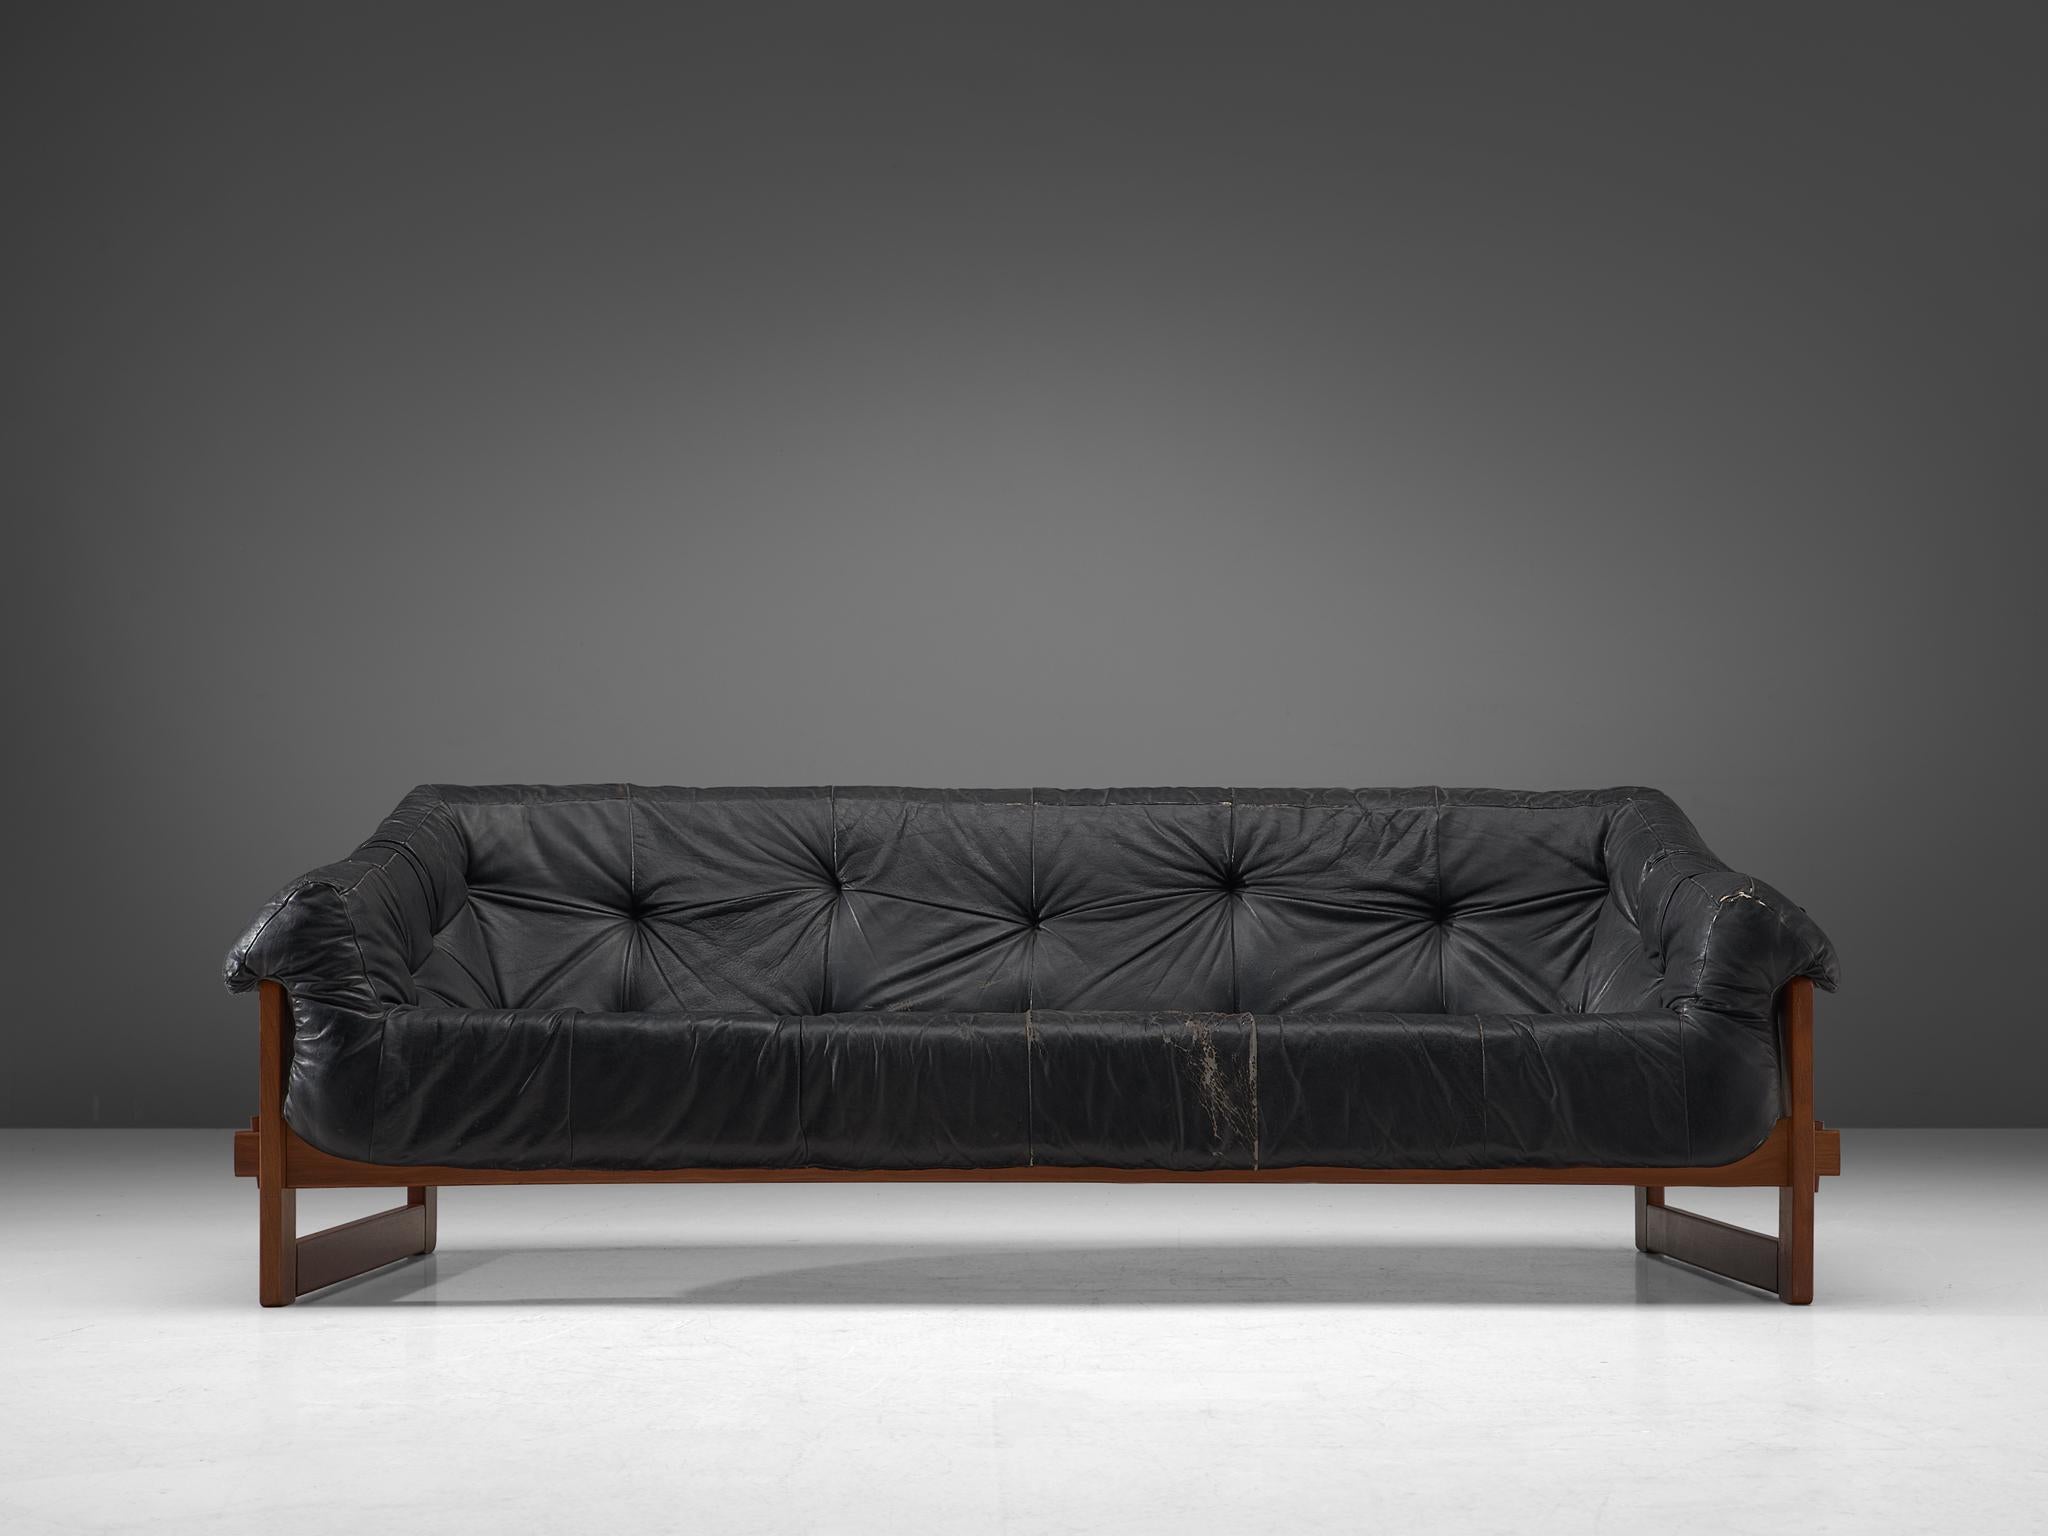 Percival Lafer, sofa, leather and brazilian hardwood, Brazil, late 1960s.

Bulky and grand sofa by Brazilian designer Percival Lafer. This set features a solid dark wooden base with leather straps spanned between the slats. The tufted leather